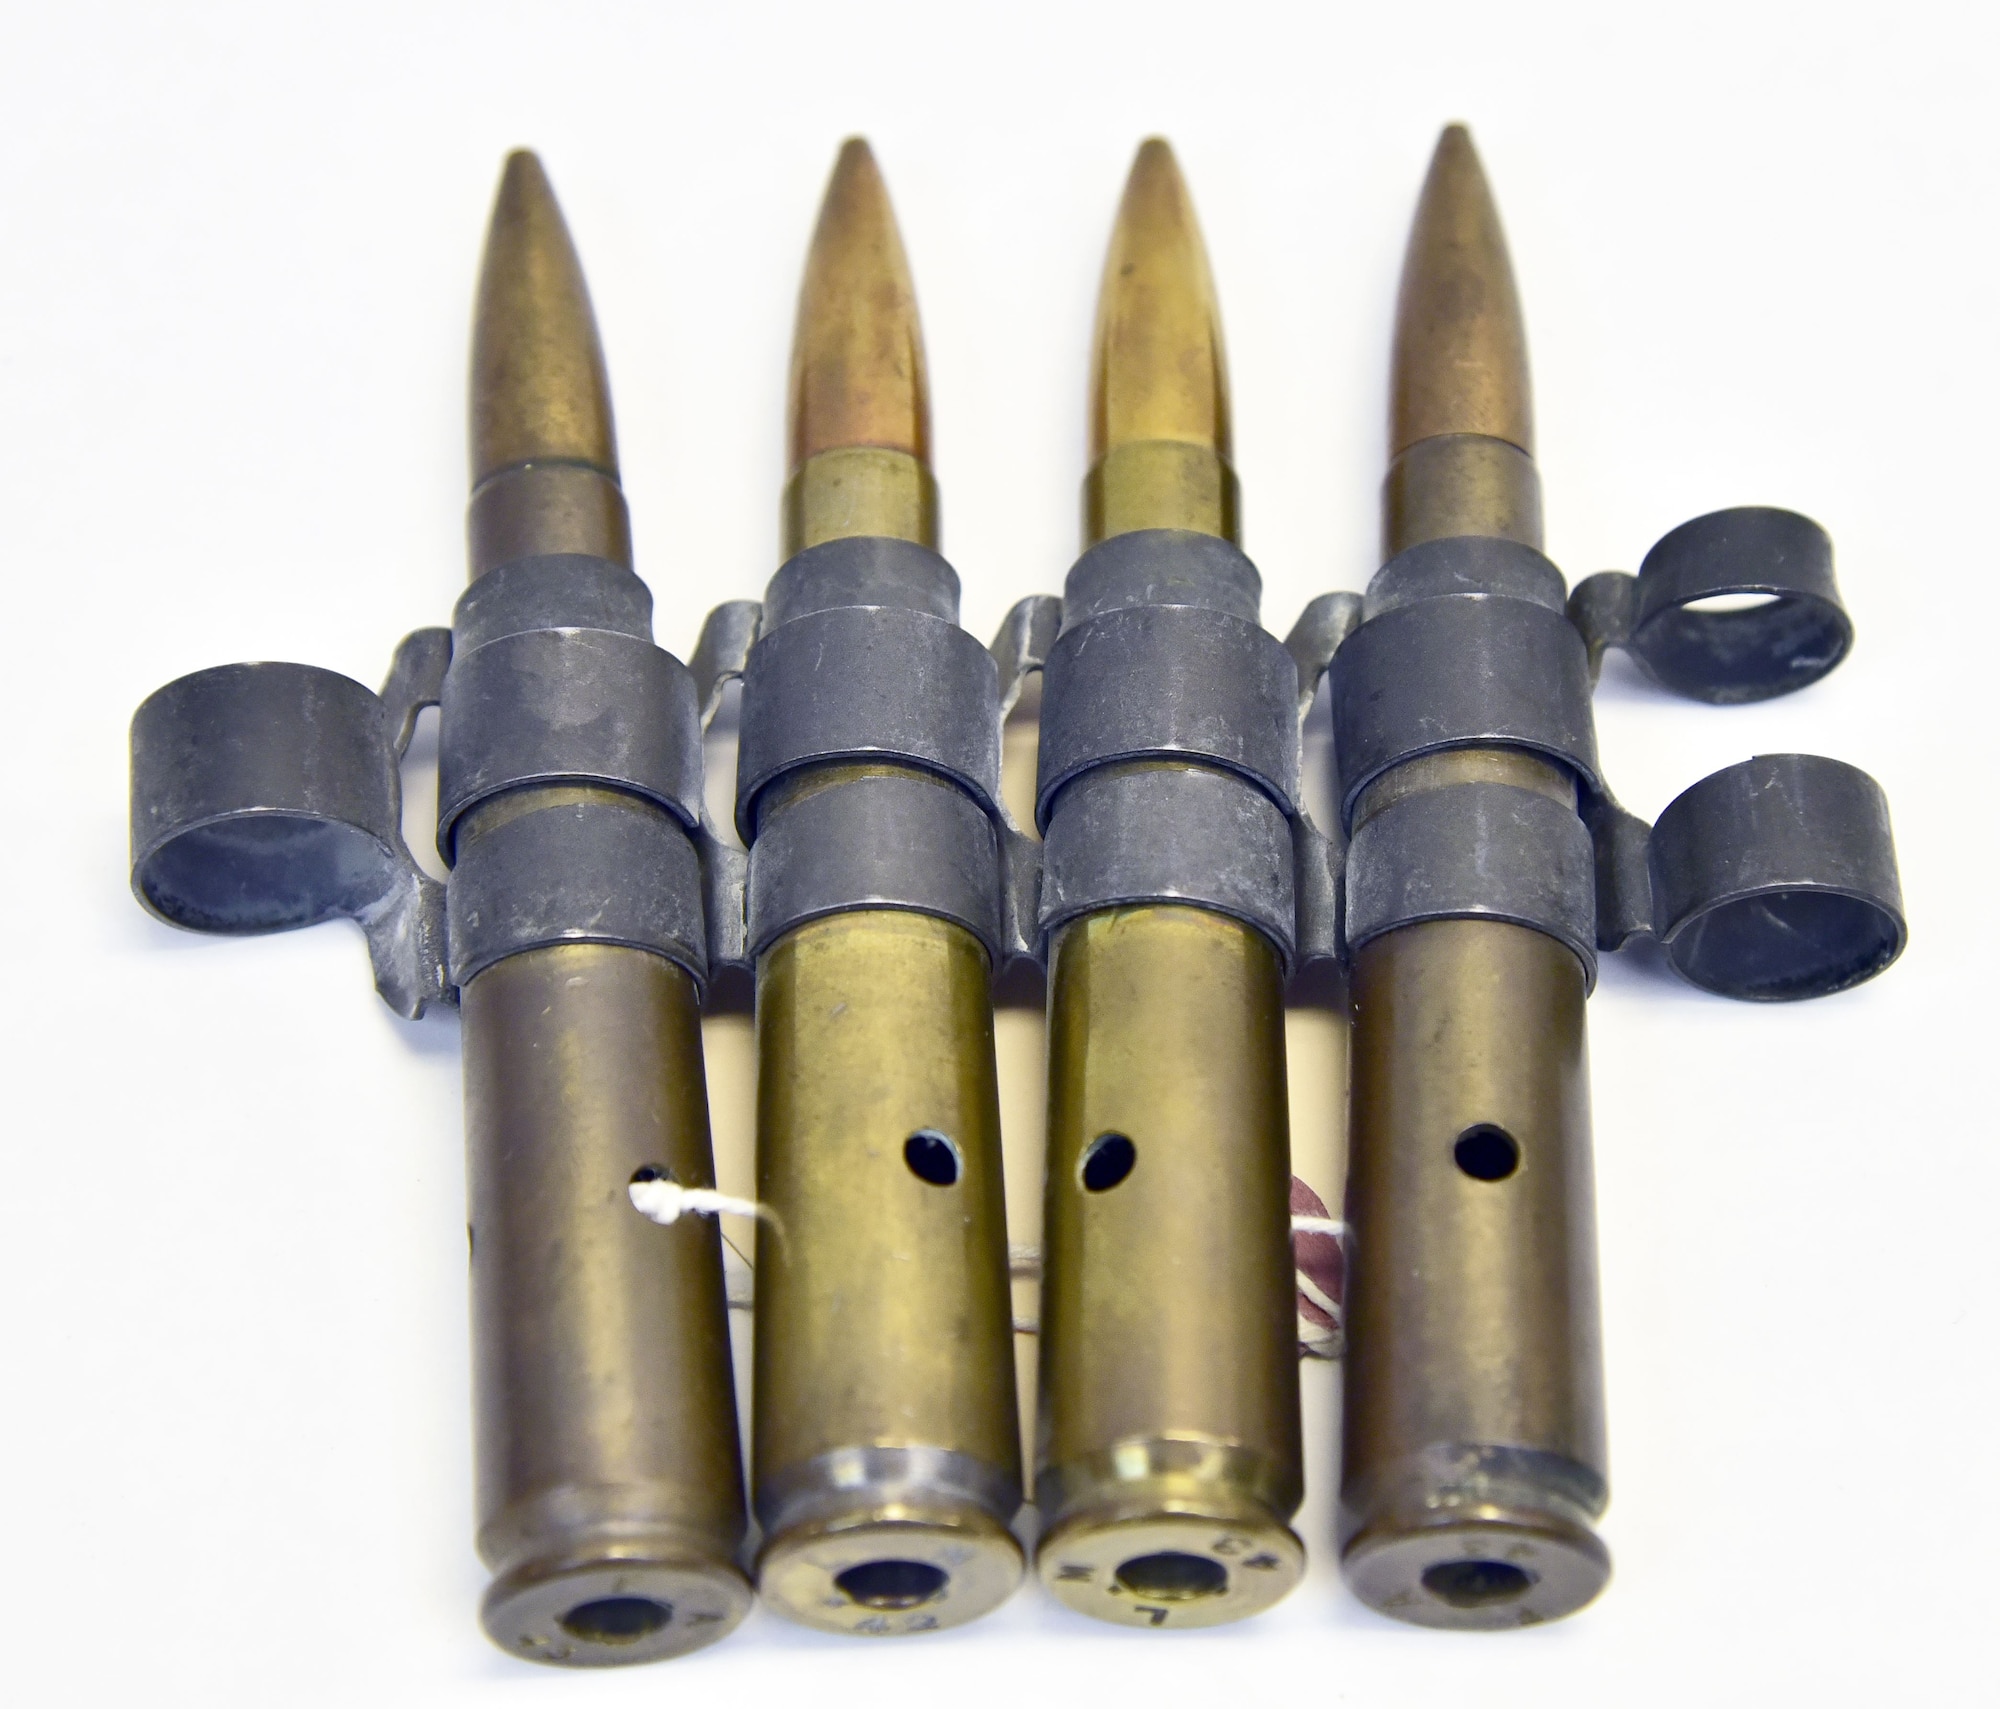 Plans call for this artifact to be displayed near the B-17F Memphis Belle™ as part of the new strategic bombardment exhibit in the WWII Gallery, which opens to the public on May 17, 2018. These .50-cal. rounds were found under the bombardier compartment of the Memphis Belle after it came back to the U.S.